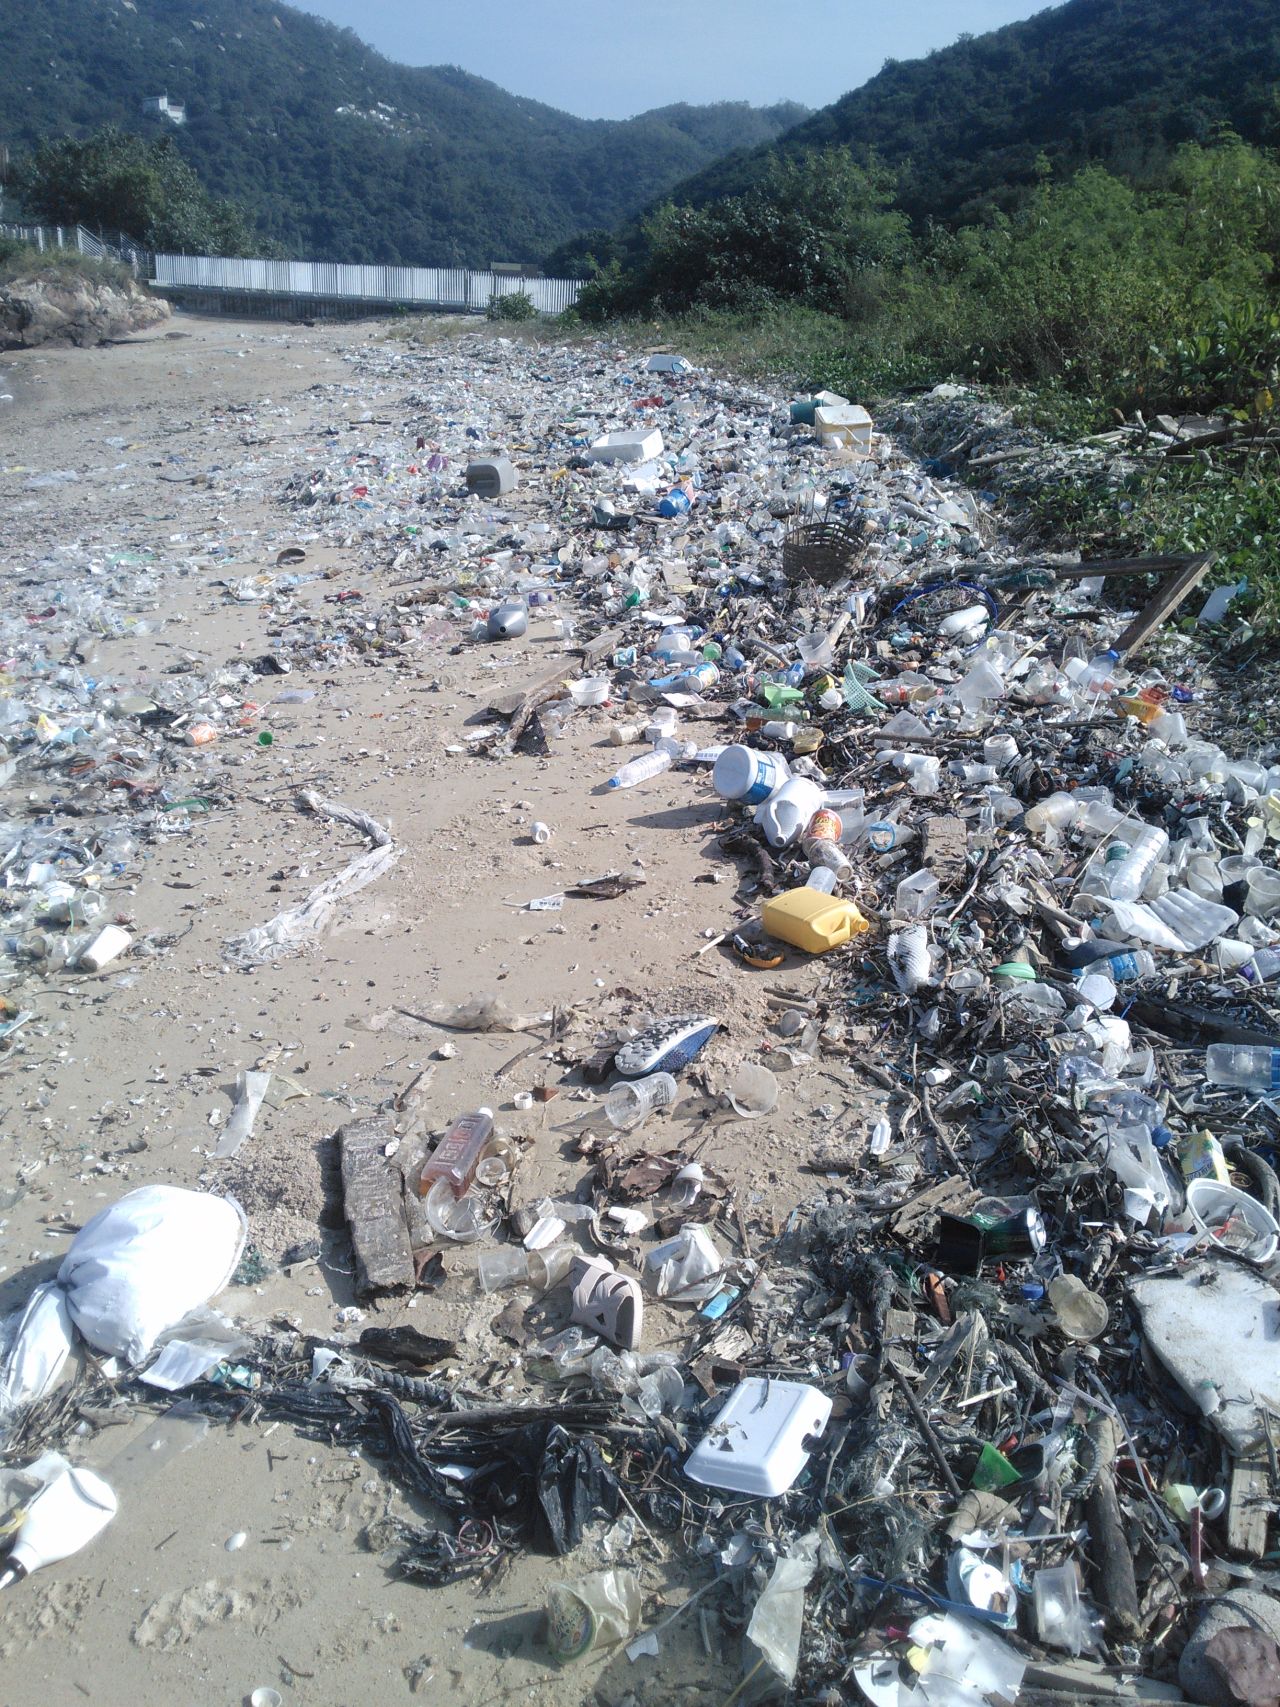 But thousands of tons of plastic are dumped into Hong Kong landfills every week.